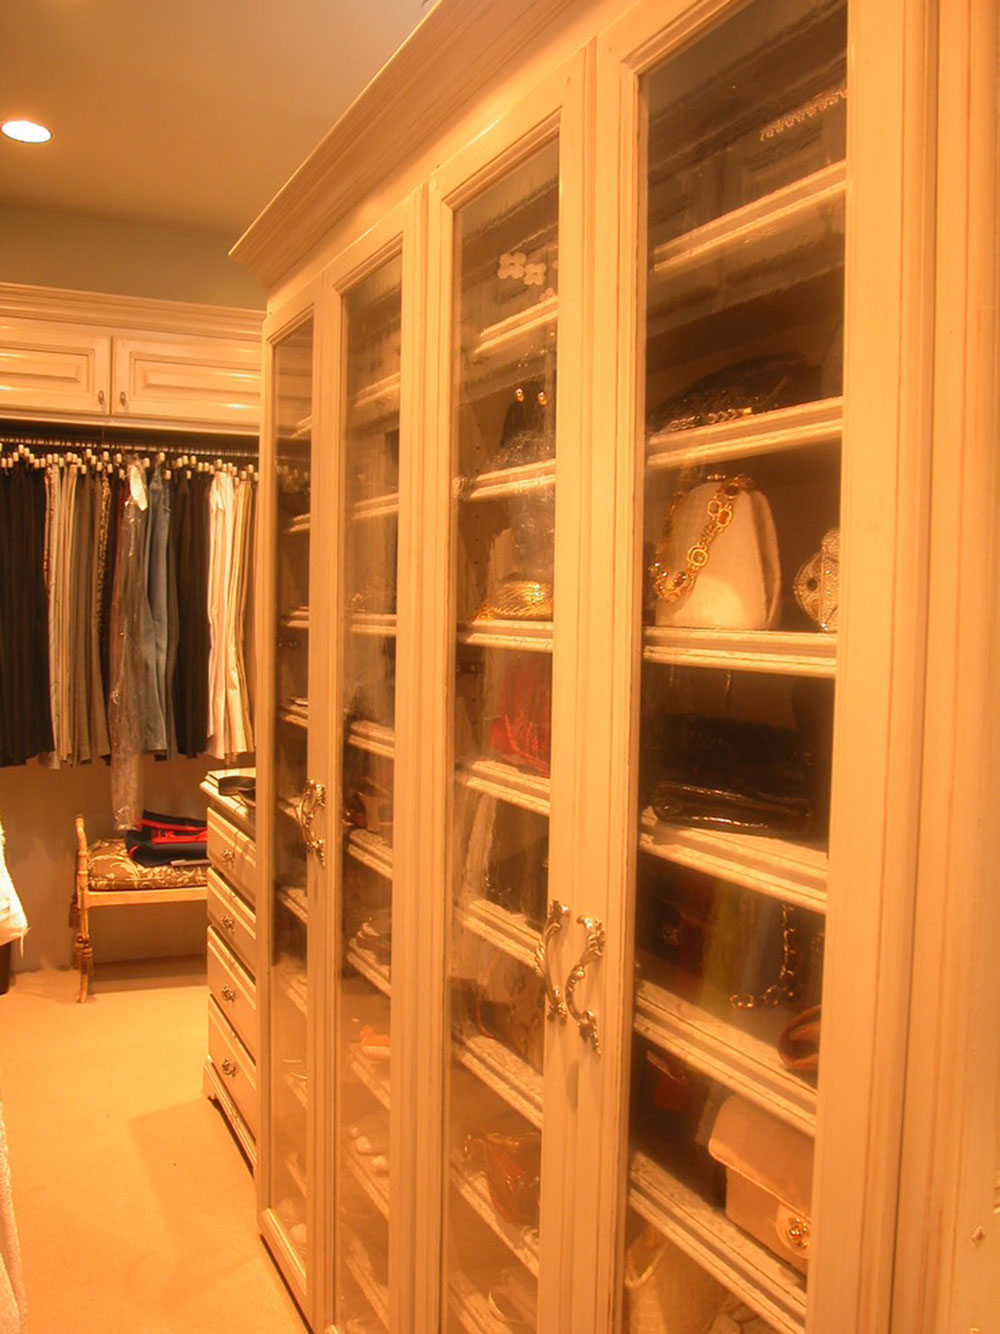 Closets-of-The-French-Tradition-by-The-French-Tradition How to cover a closet without doors (Inexpensive options)